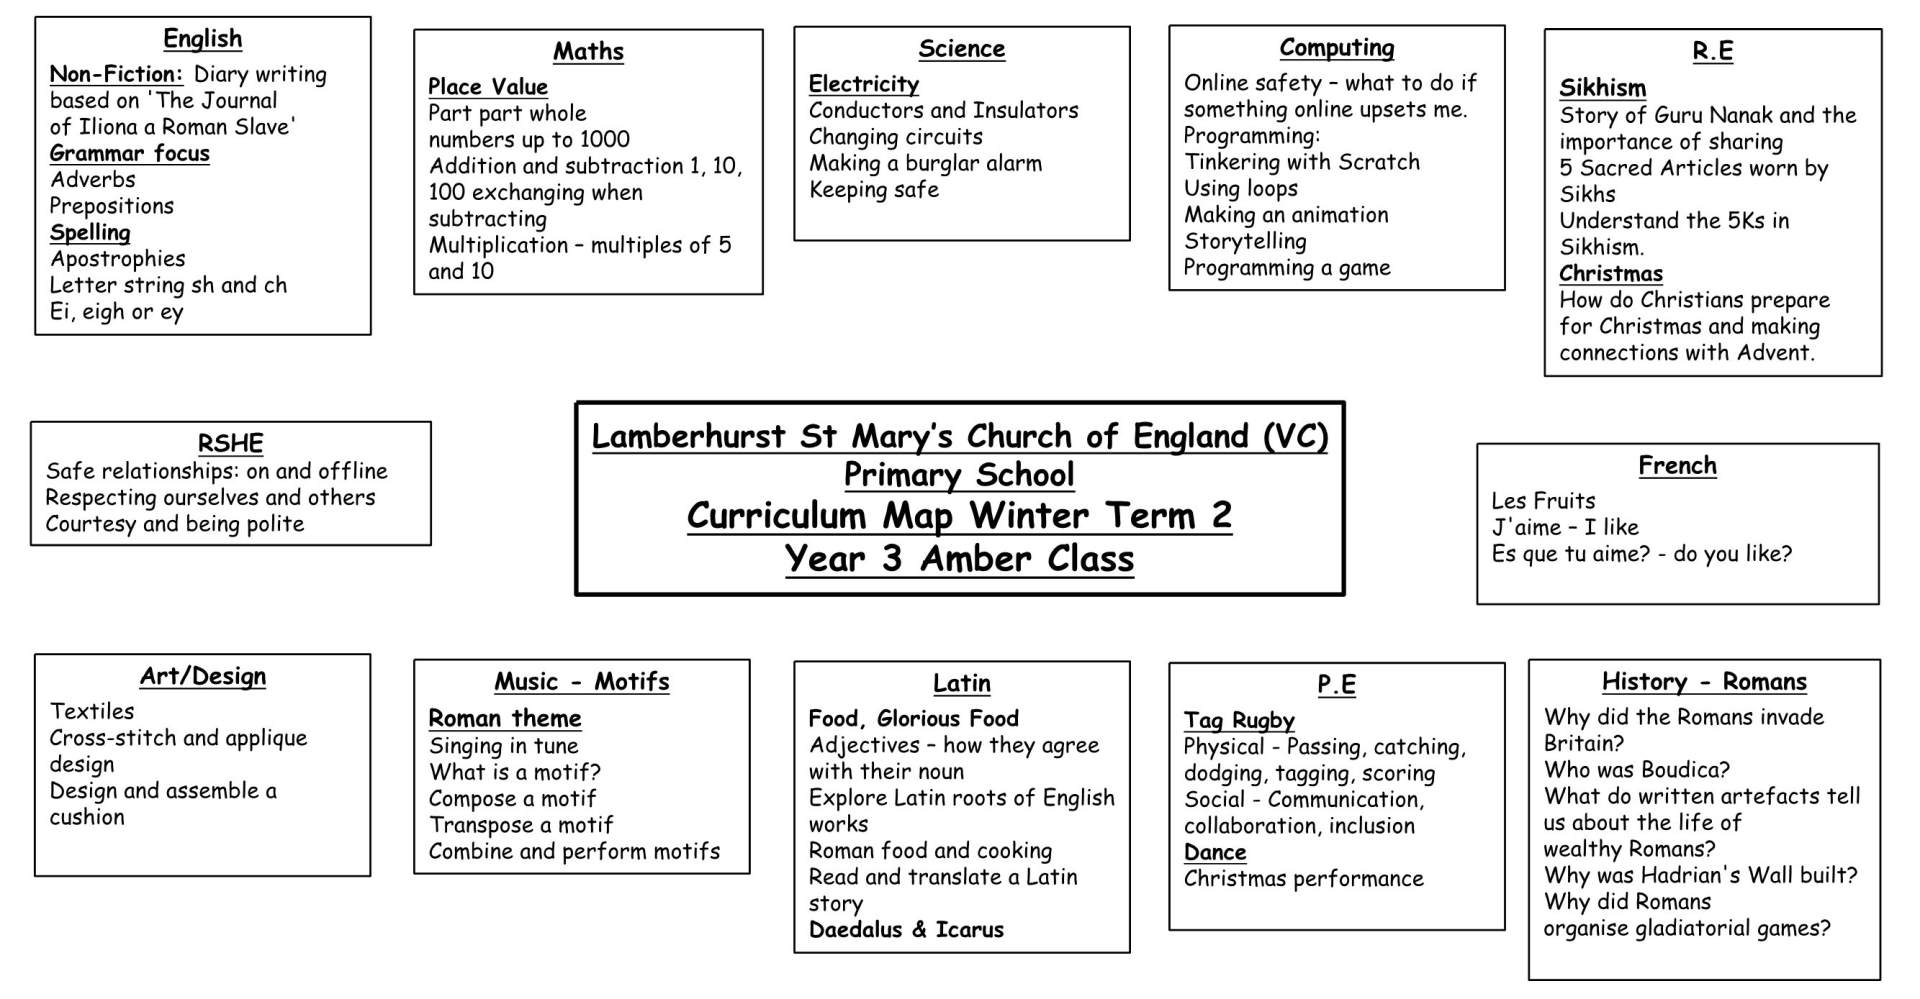 Y3 Amber Class T2 Curriculum Map